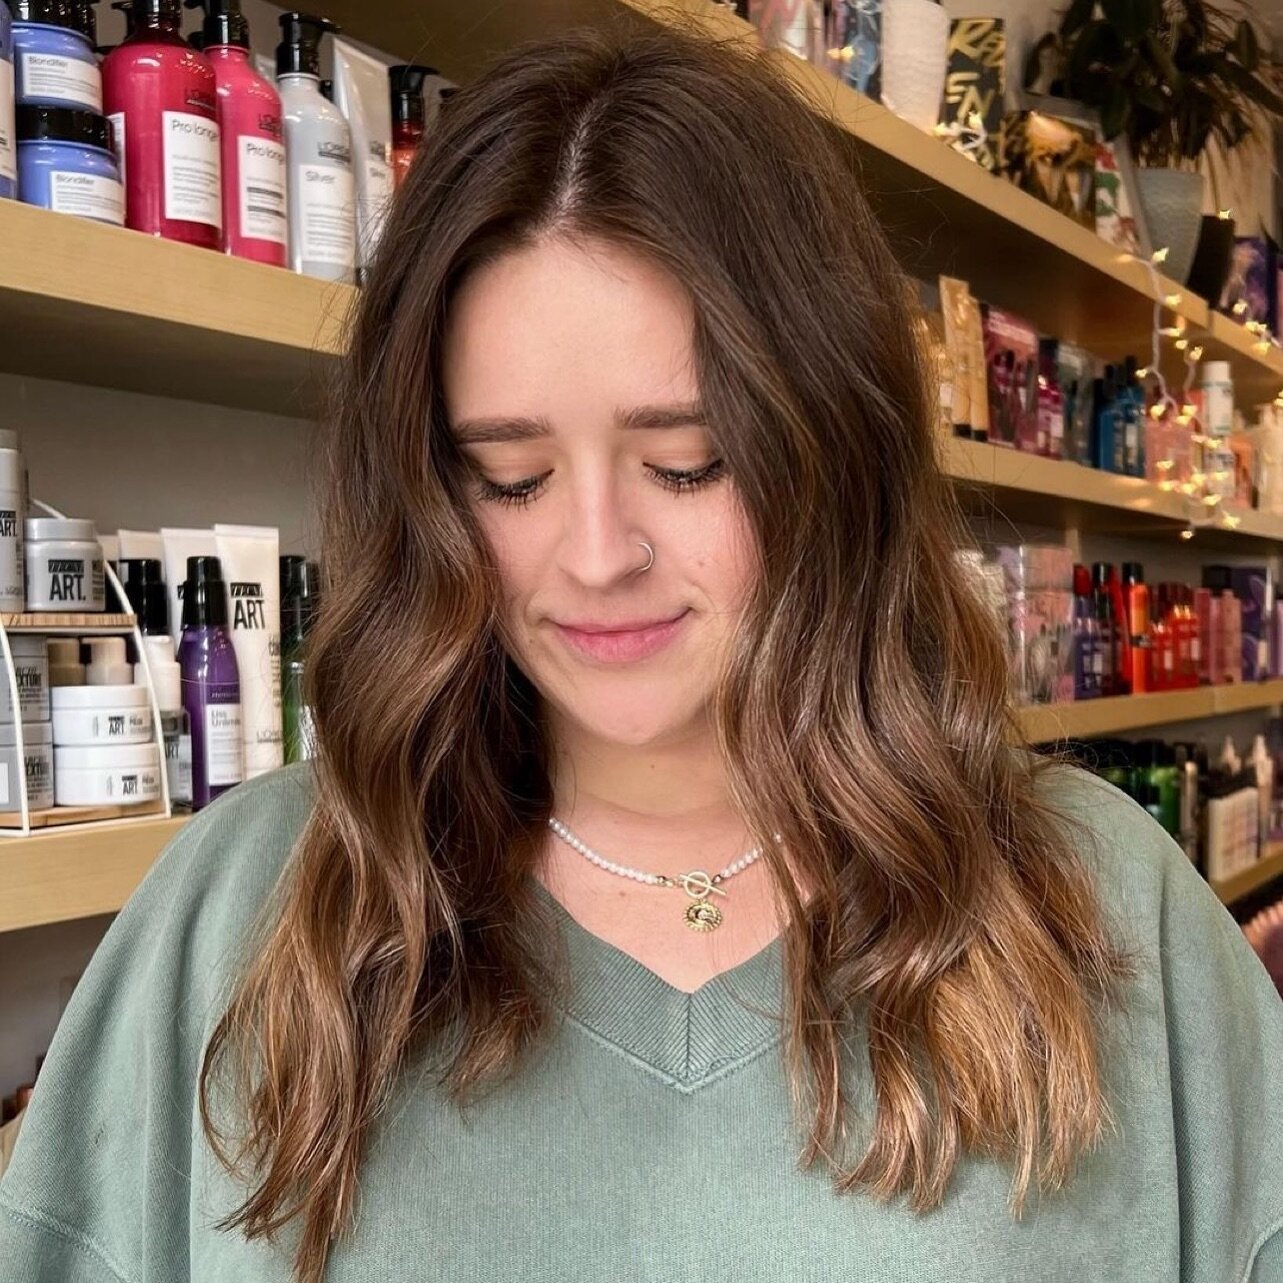 Repost from @natxbeautyy
&bull;
Low maintenance brunette🤎. Added minimal highlights for a more dimensional look.

#hair #haircut #hairstyle #beauty #balayage
#balayageblonde #balayagehair #brunnete#blonde #haircolor#color #highlights #blondehair #br